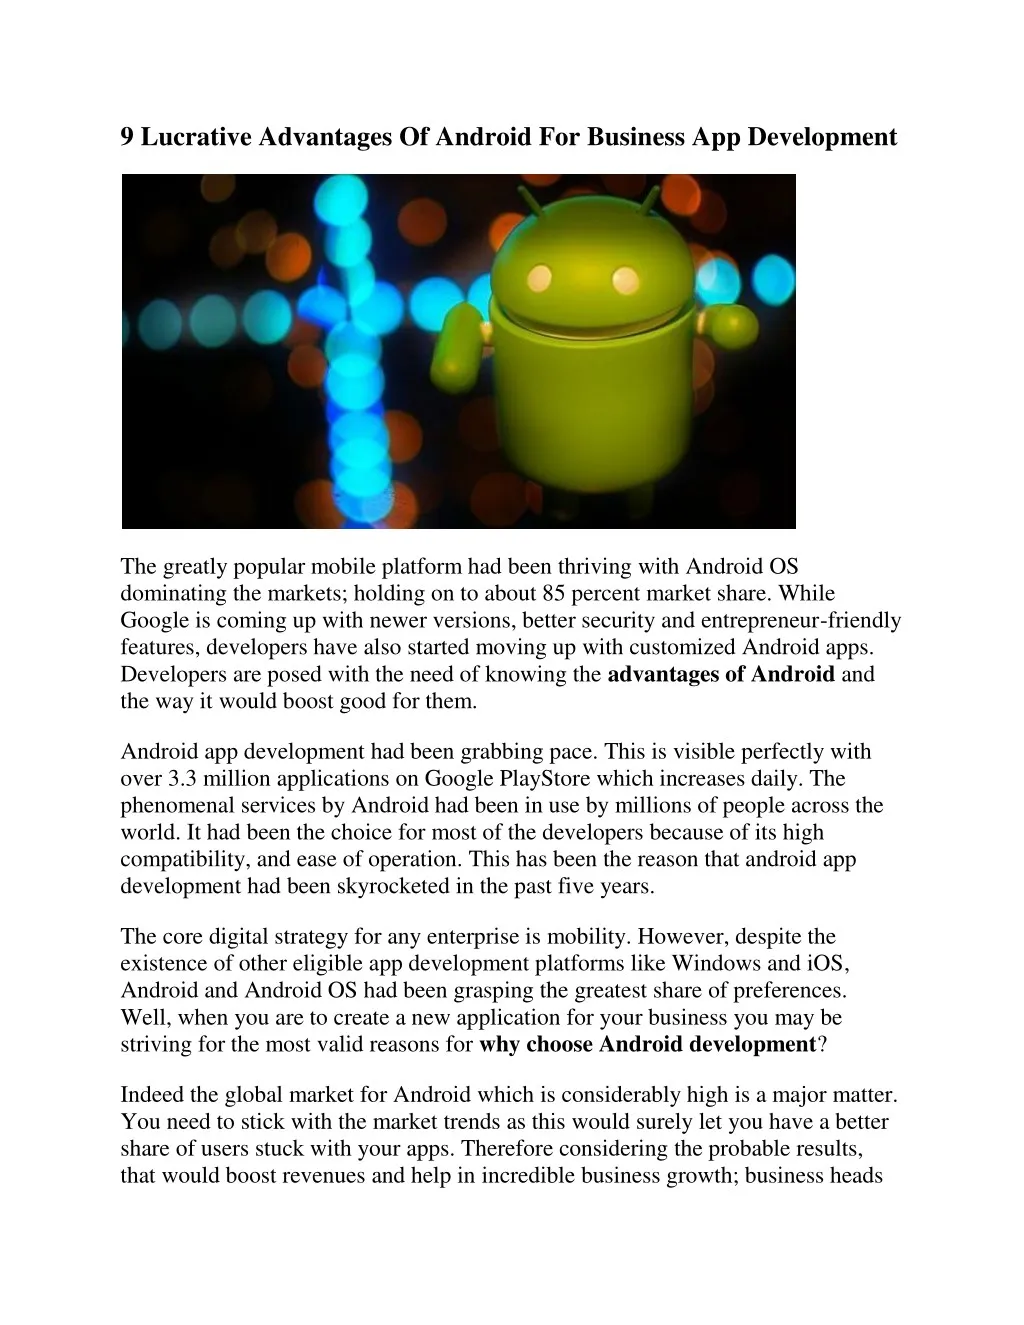 9 lucrative advantages of android for business